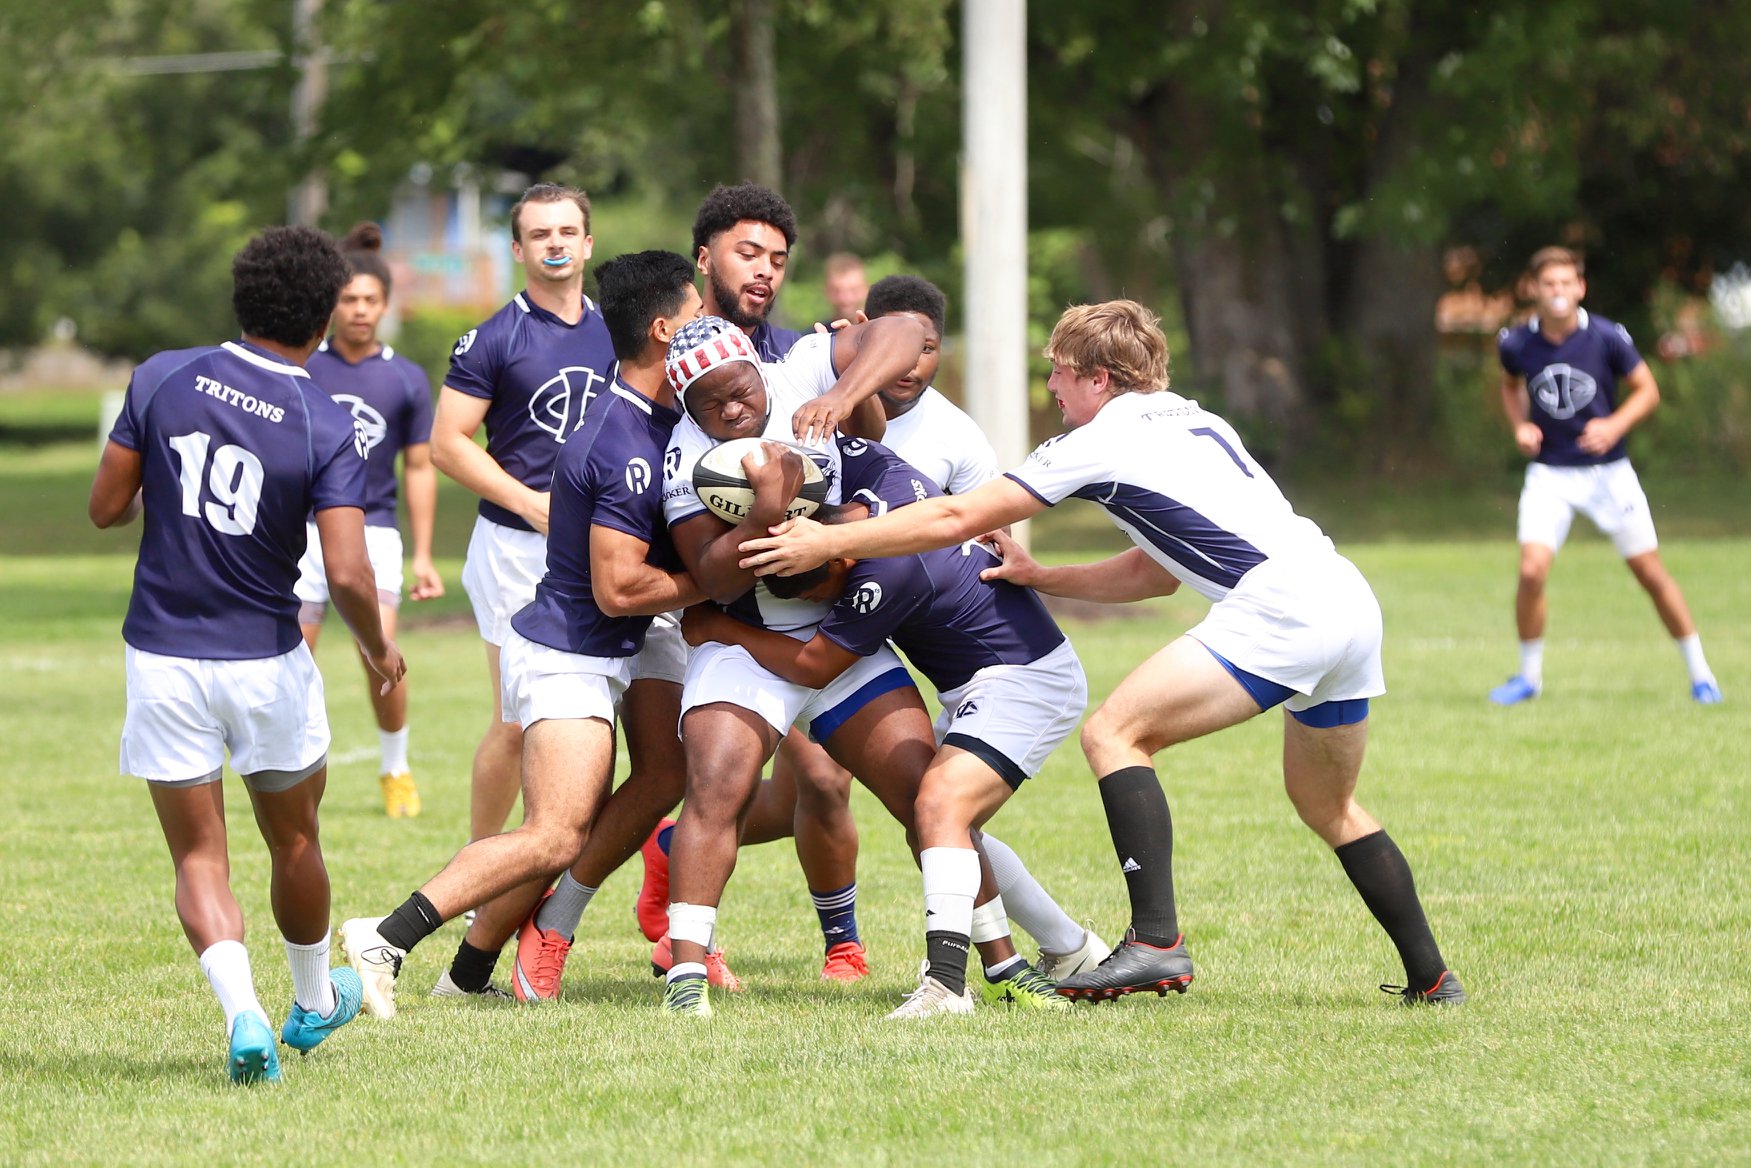 Tritons continue to build rugby program into national contender